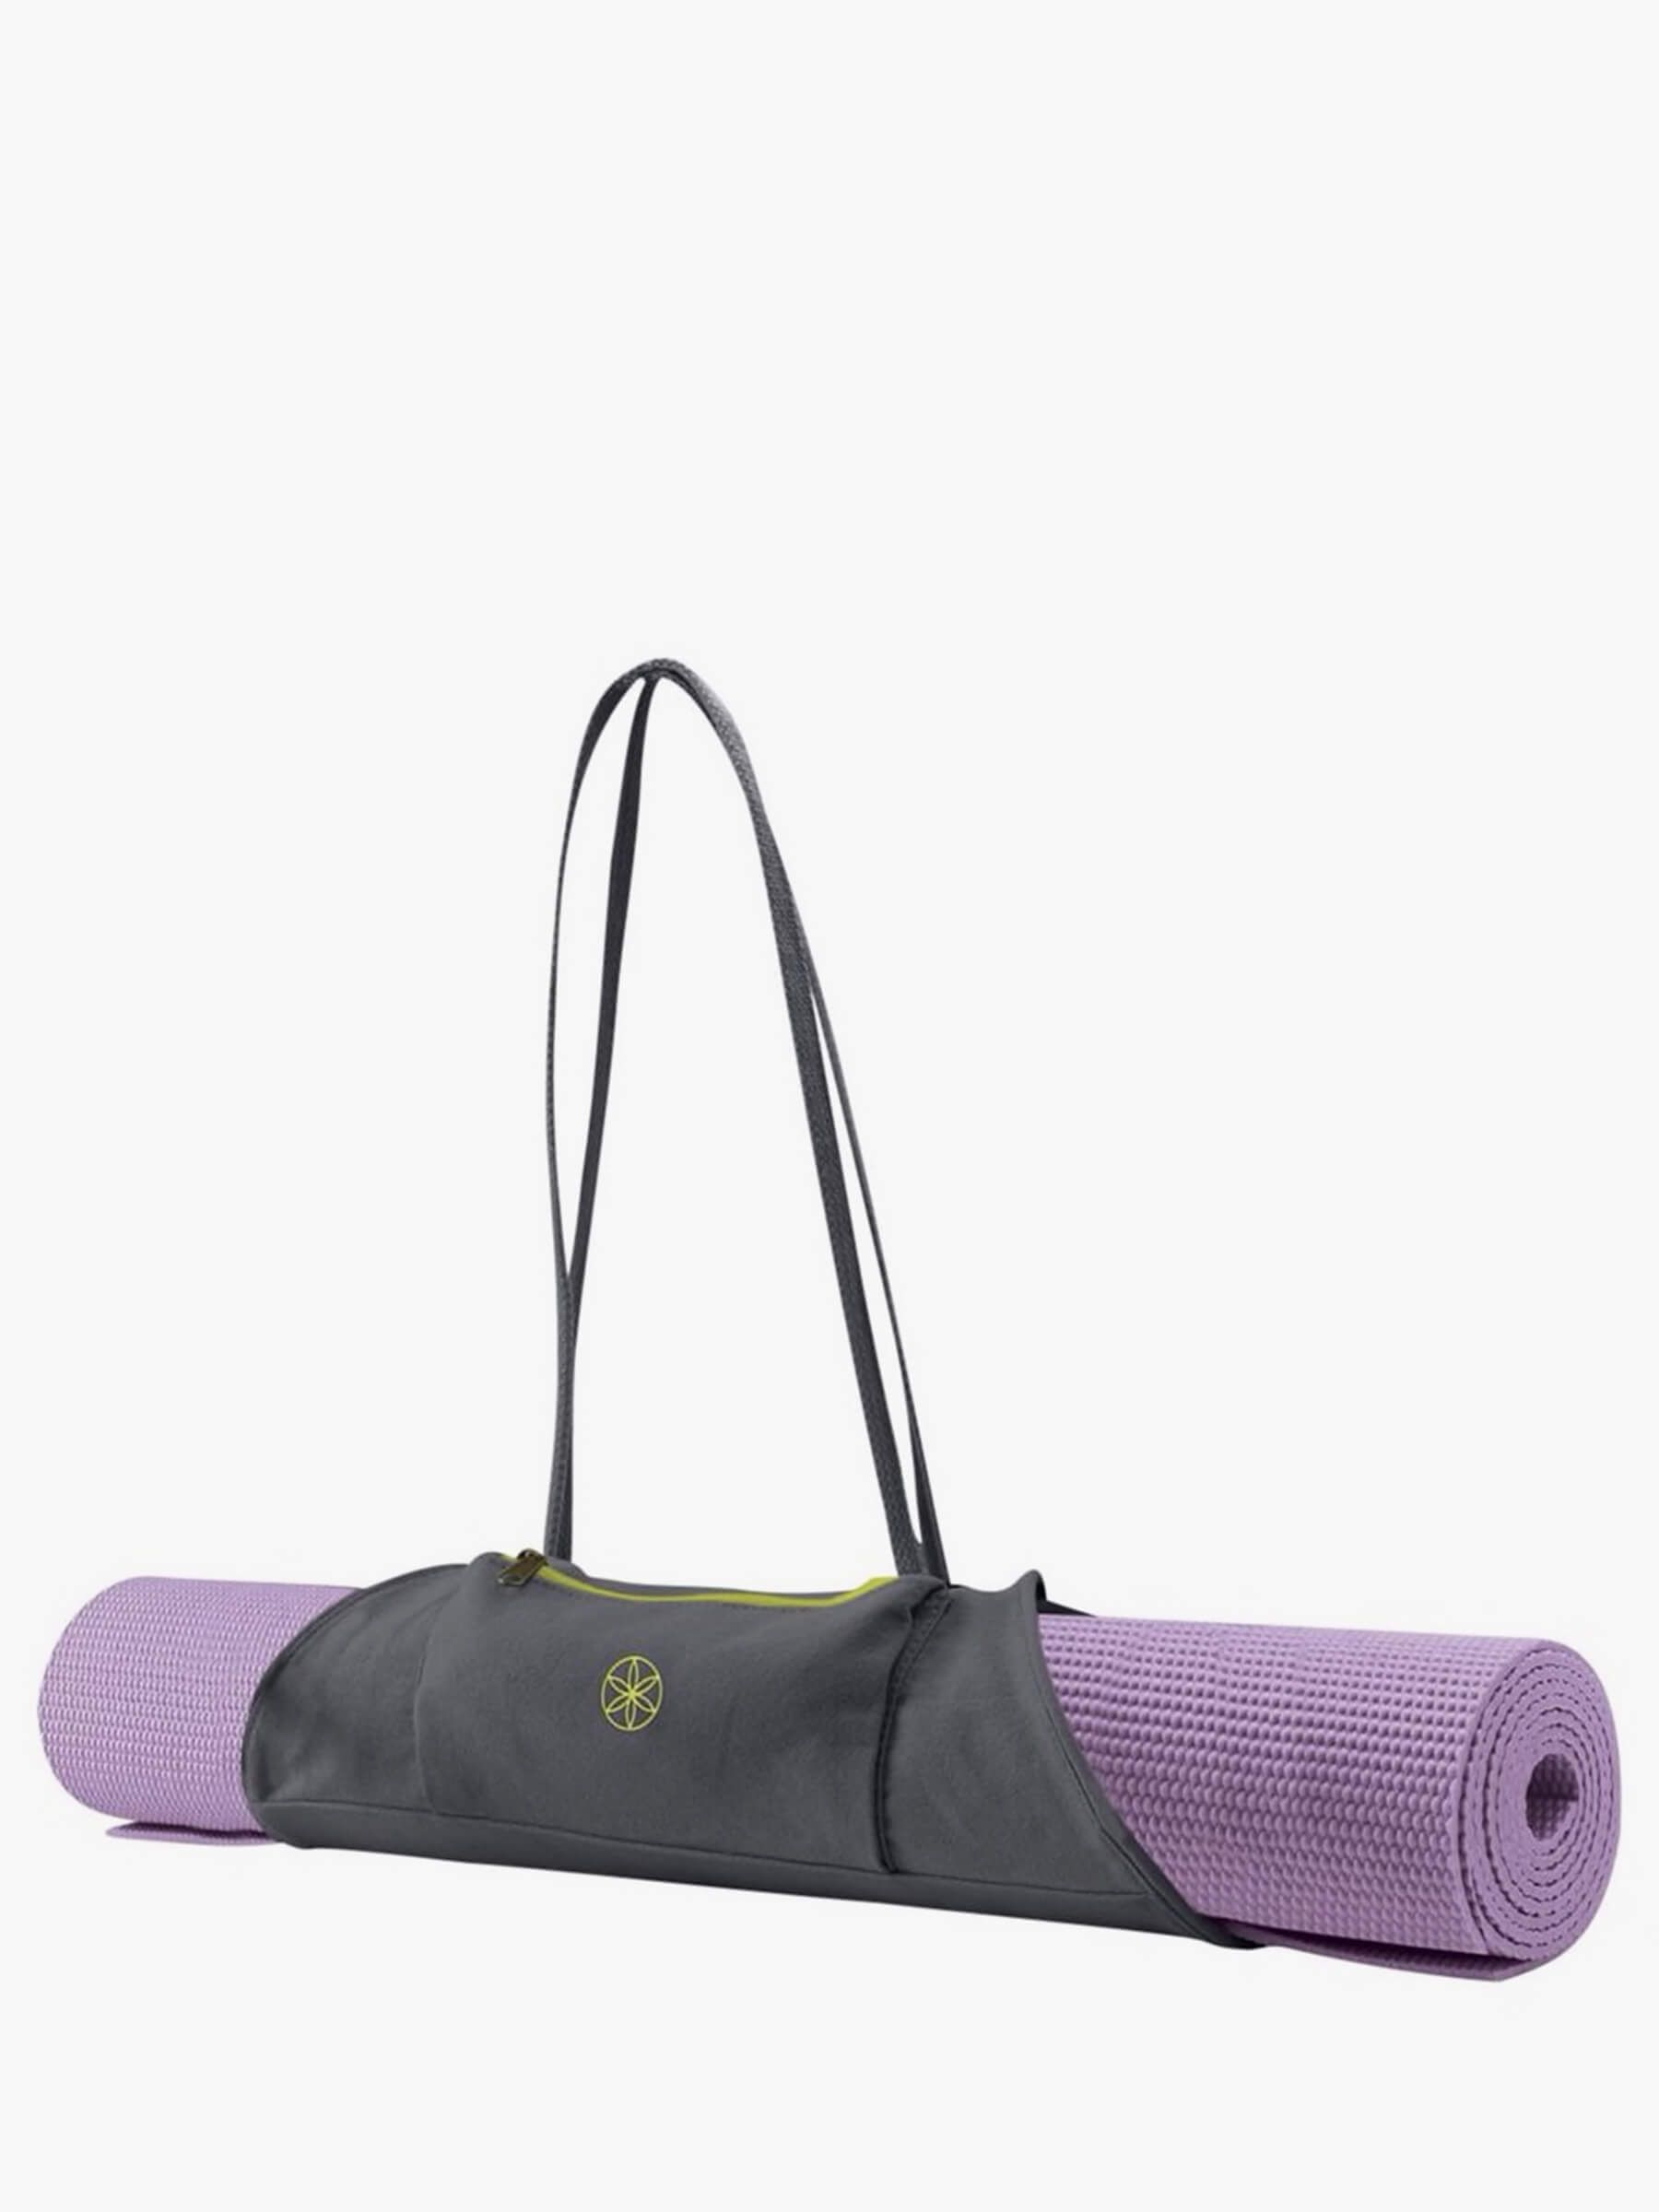 Yoga Mat Bags & Holders - Gaiam Yoga Mat Carrier - Gym Bag With